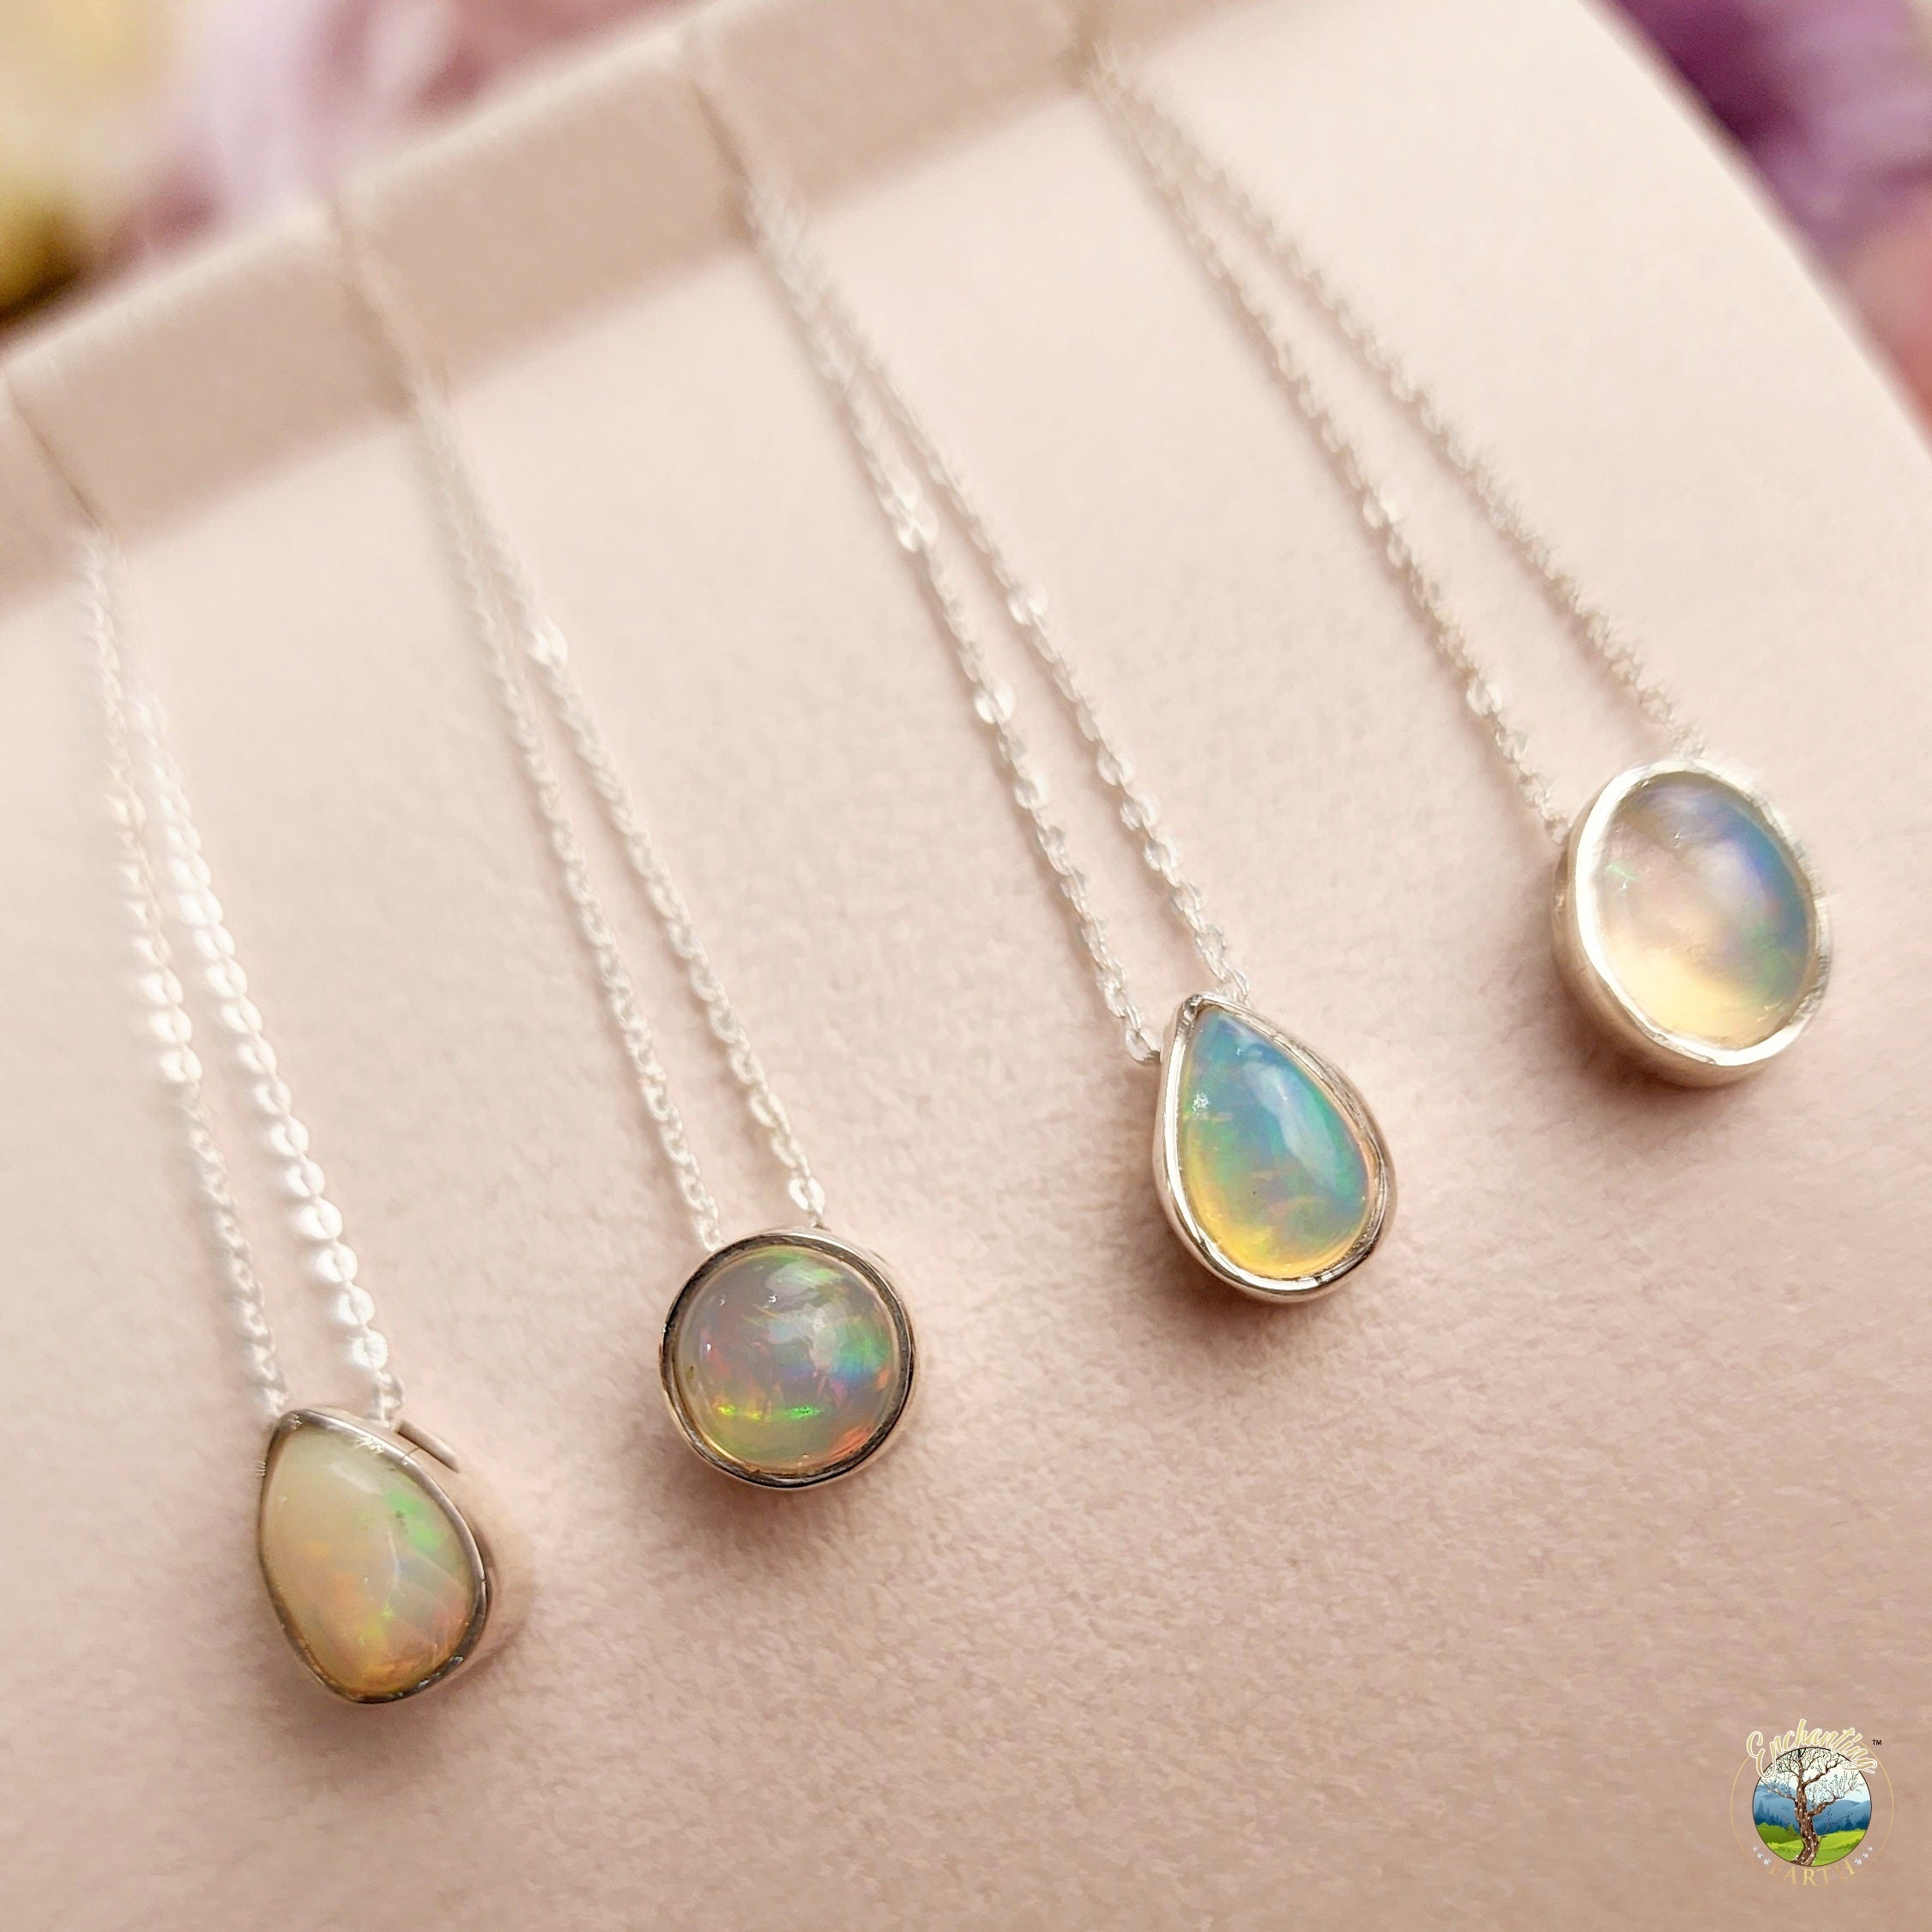 Ethiopian Opal Necklace .925 Silver for Creativity, Joy and Self Discovery